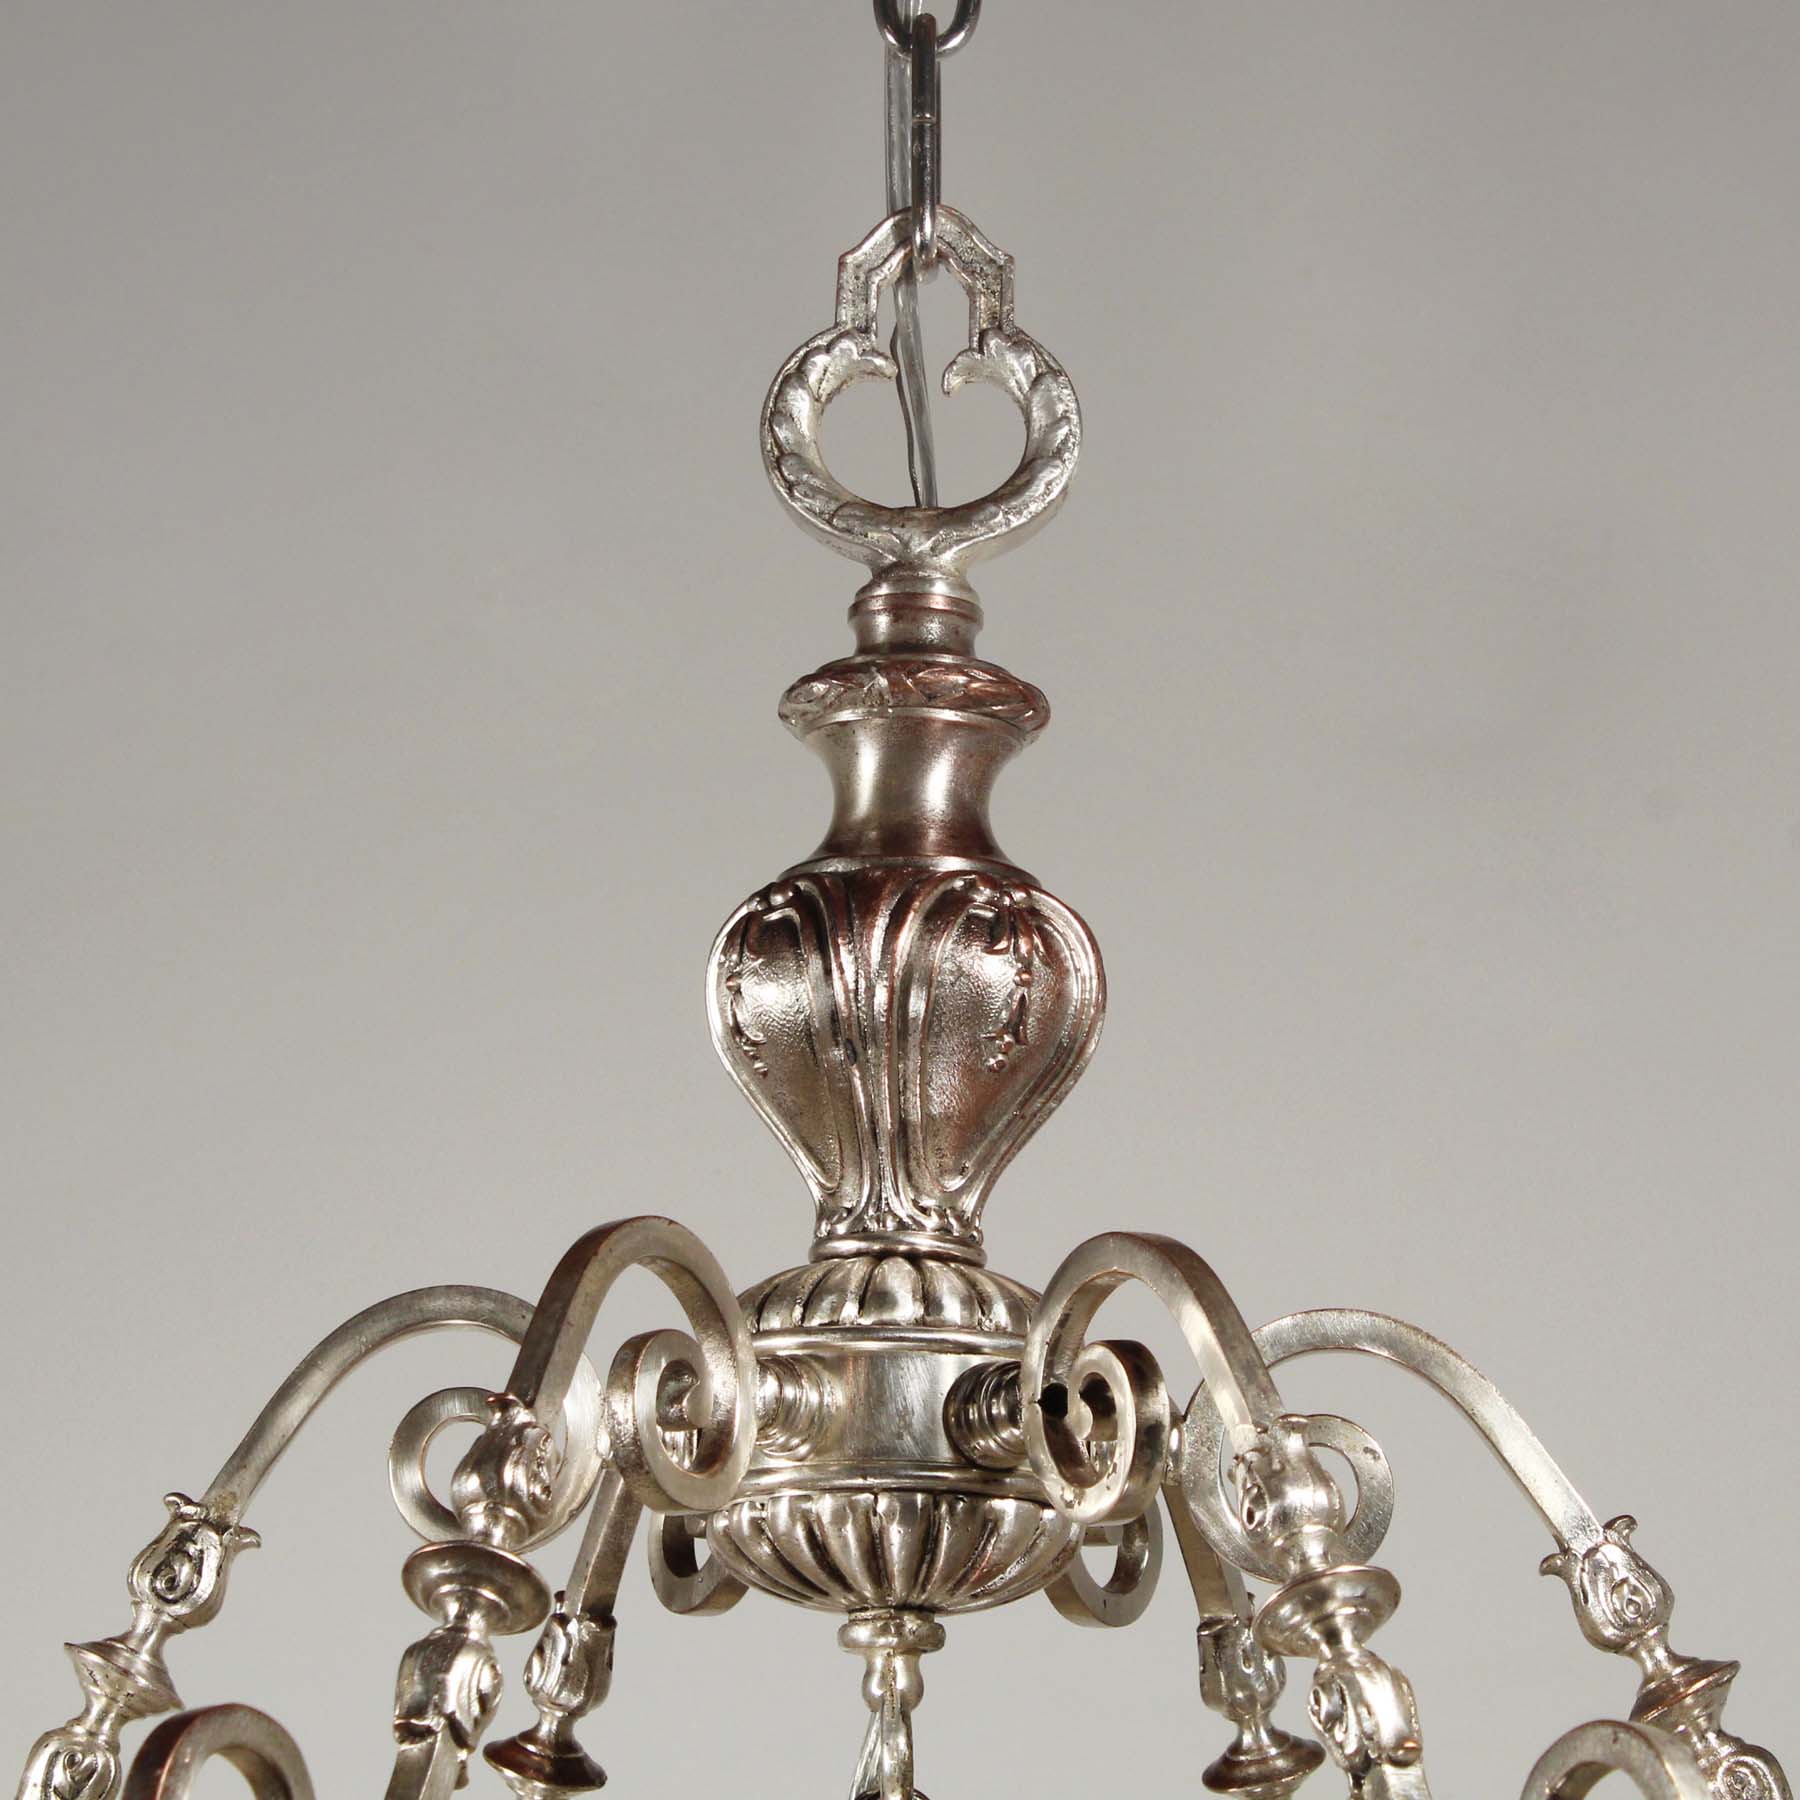 SOLD Antique Neoclassical Pendant Light, Silver Plate-67863